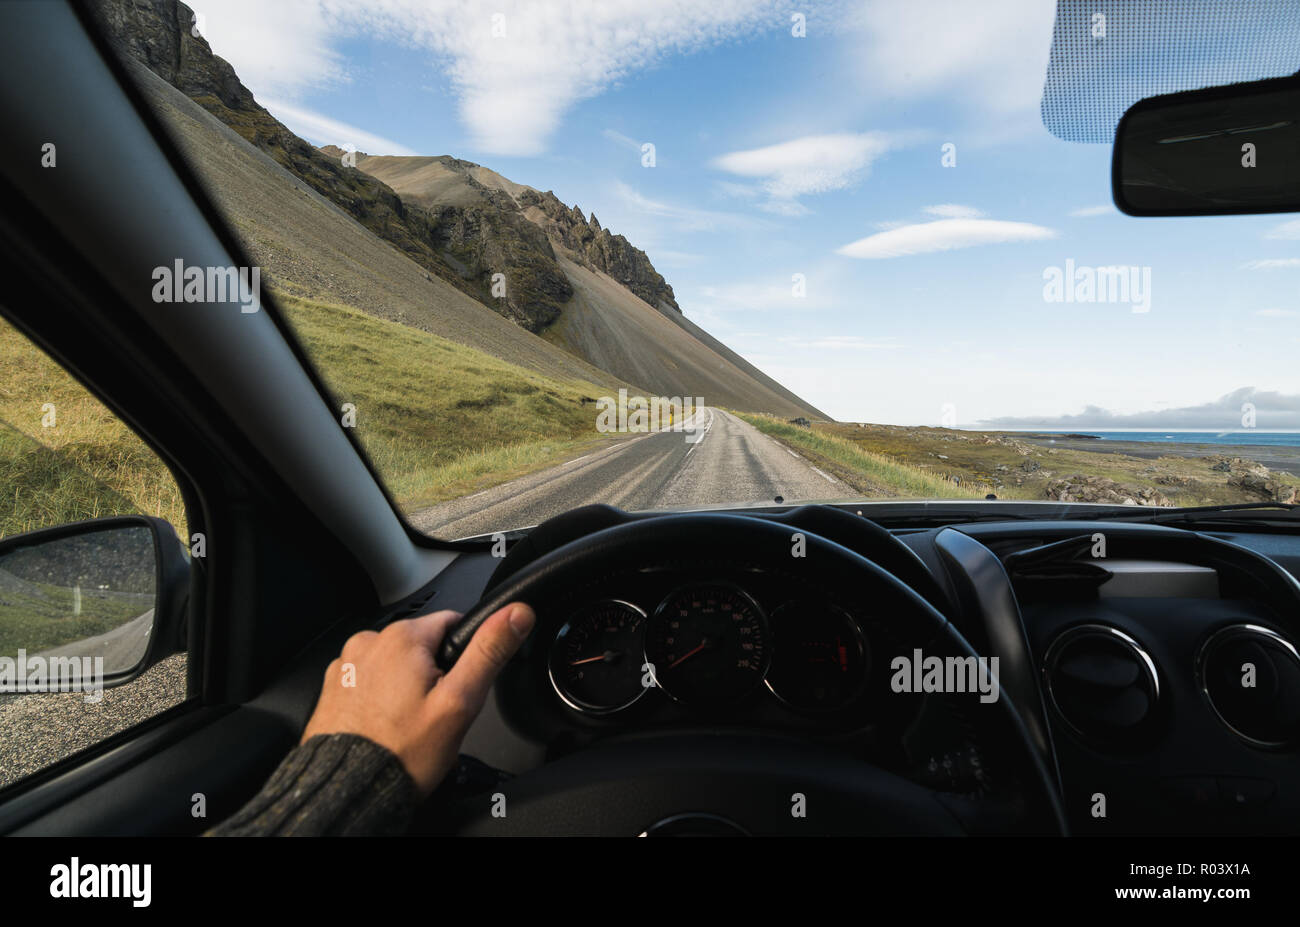 https://c8.alamy.com/comp/R03X1A/view-from-drivers-seat-over-the-coastal-road-at-the-south-of-iceland-R03X1A.jpg